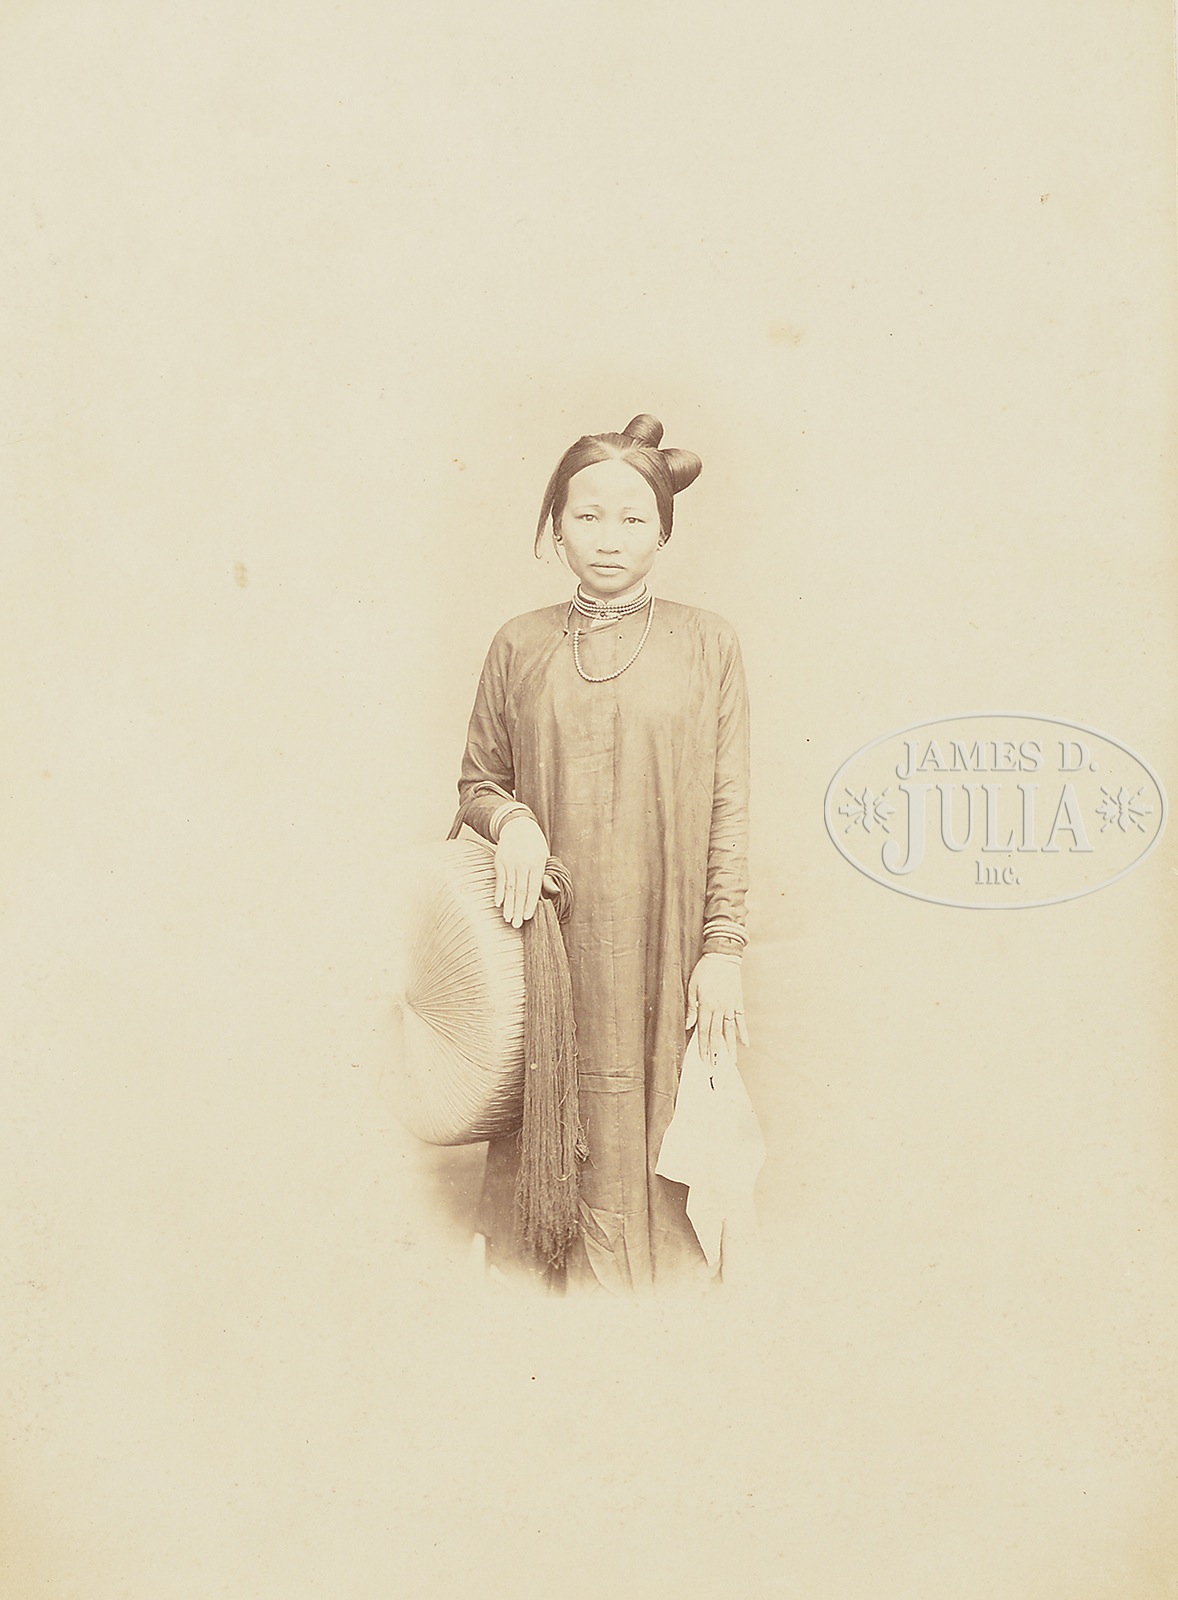 EXTRAORDINARY & MASSIVE LIFE LONG COLLECTION OF RARE ASIAN PHOTOGRAPHS AMASSED BY DR. HELGA WALL- - Image 68 of 222